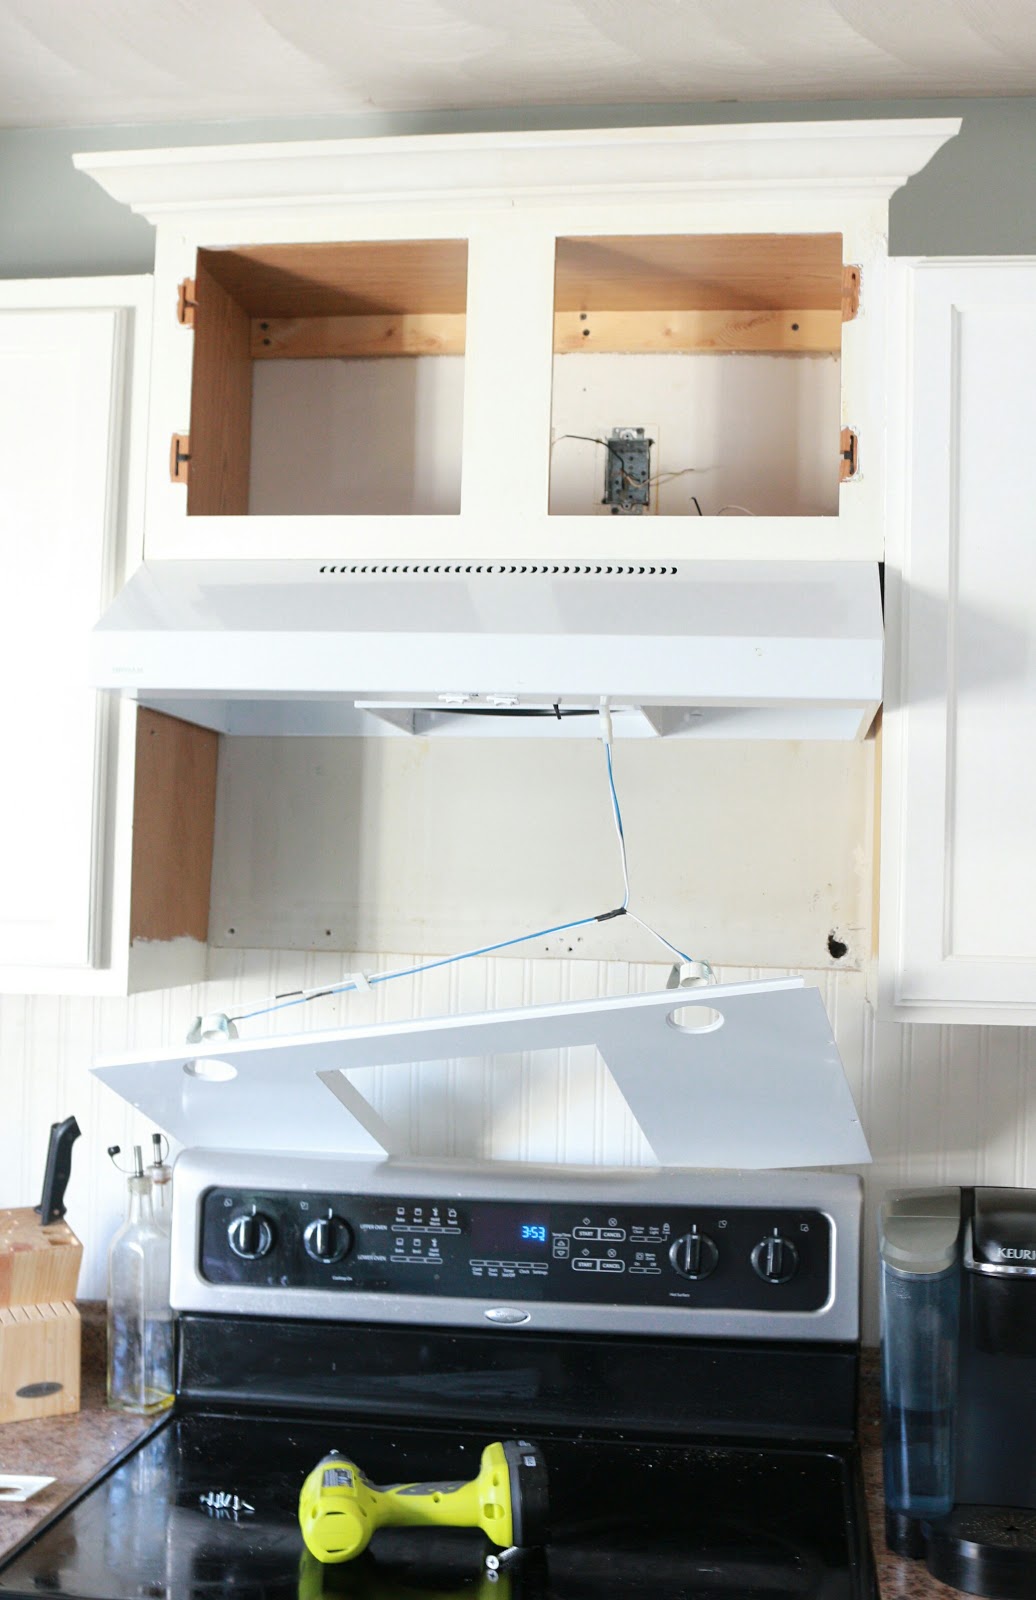 my diy kitchen: how i built a rangehood over an existing cabinet